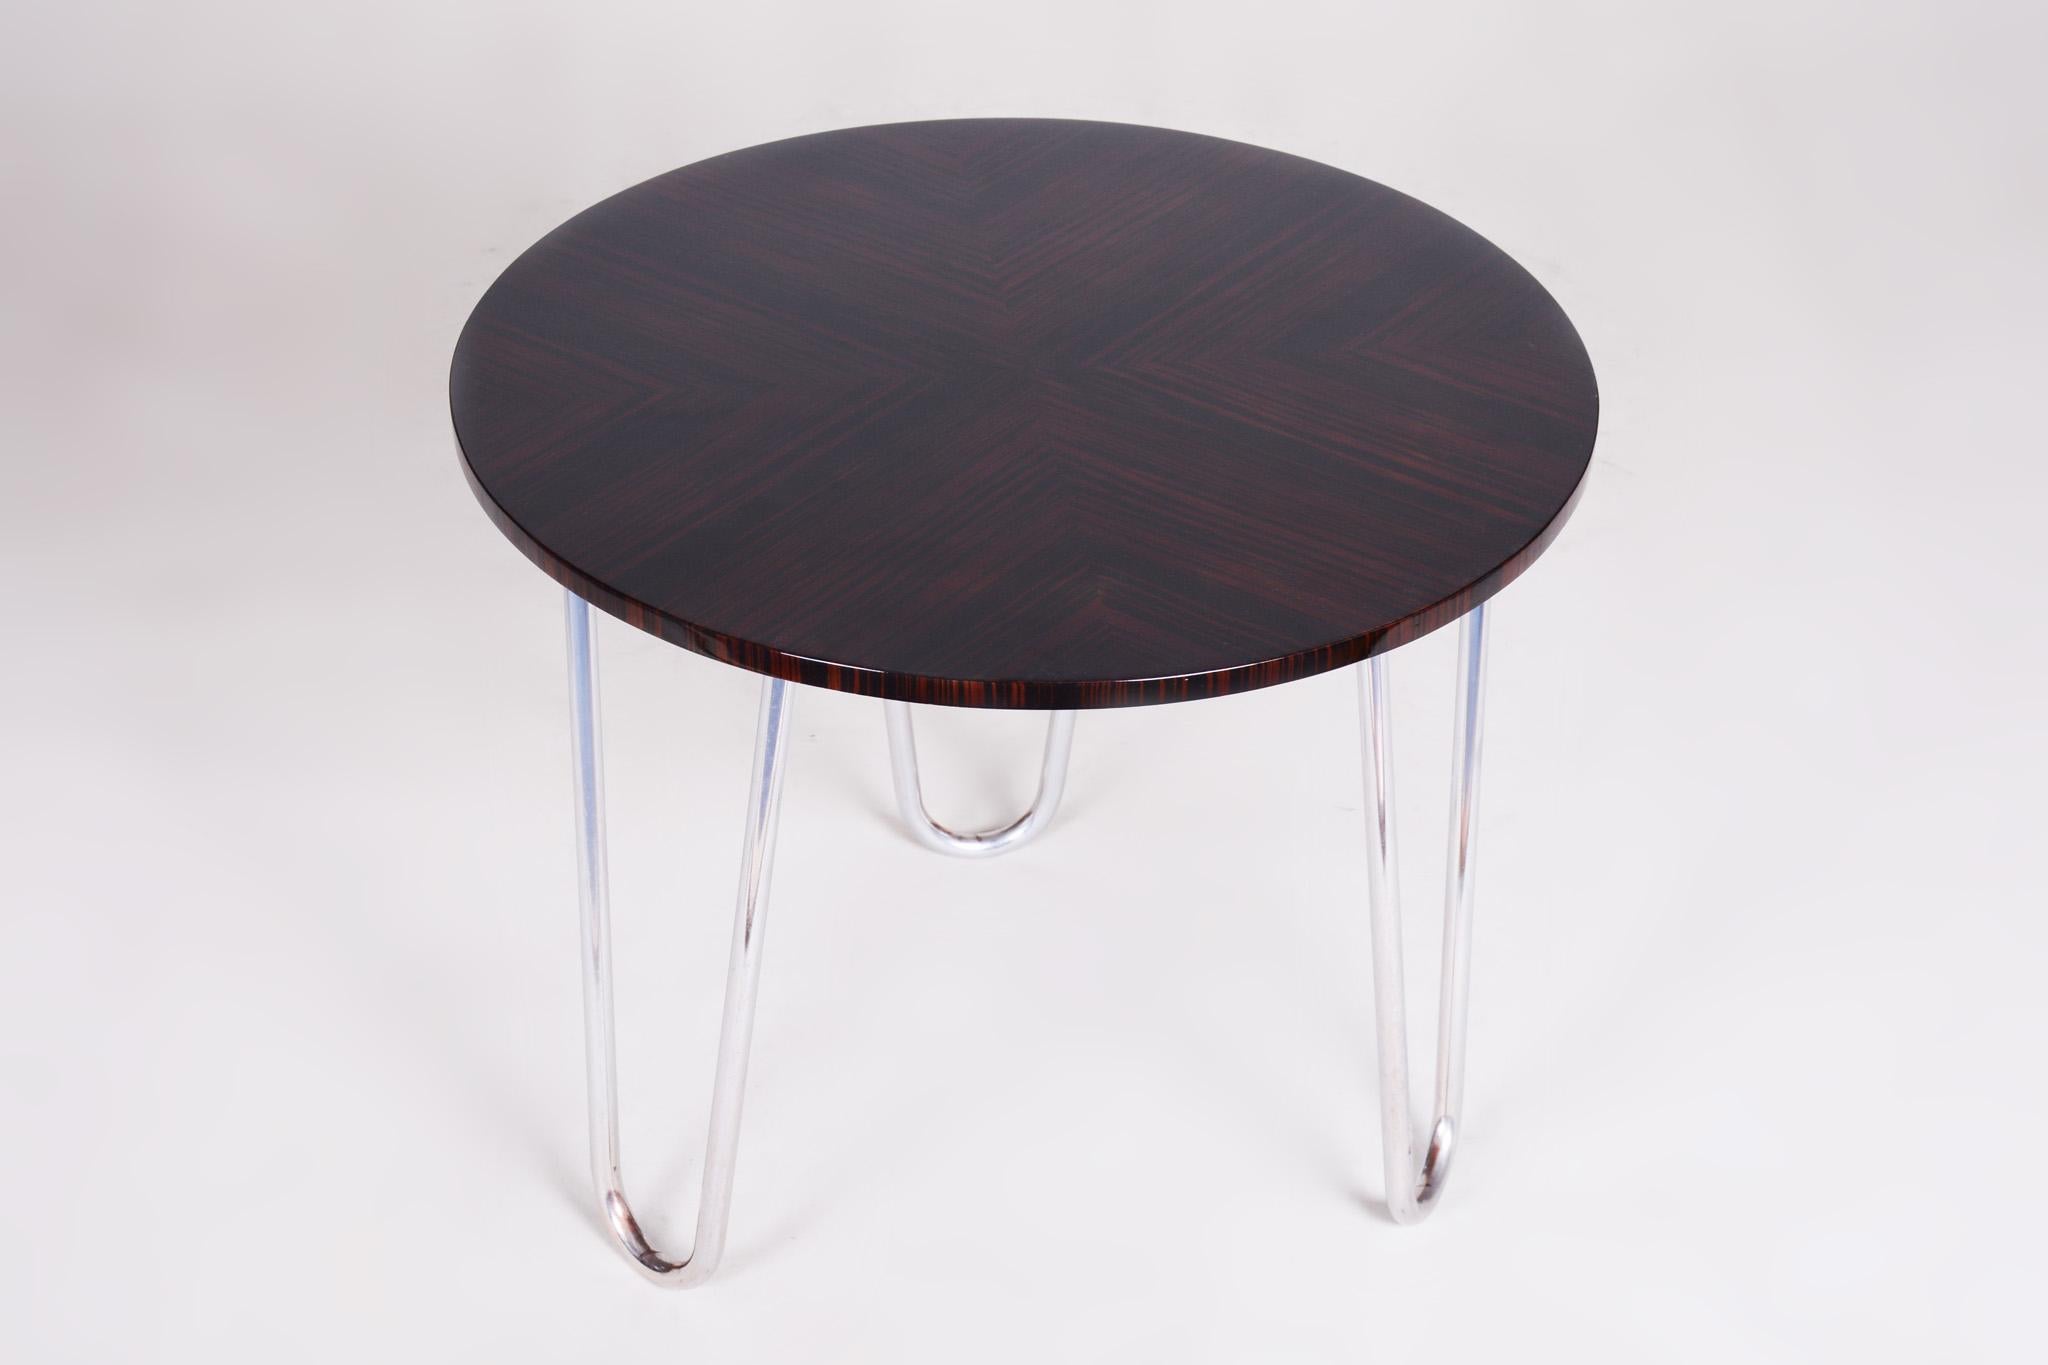 20th Century Restored Rounded Macassar Bauhaus Table, Chrome-Plated Steel, 1930s For Sale 4